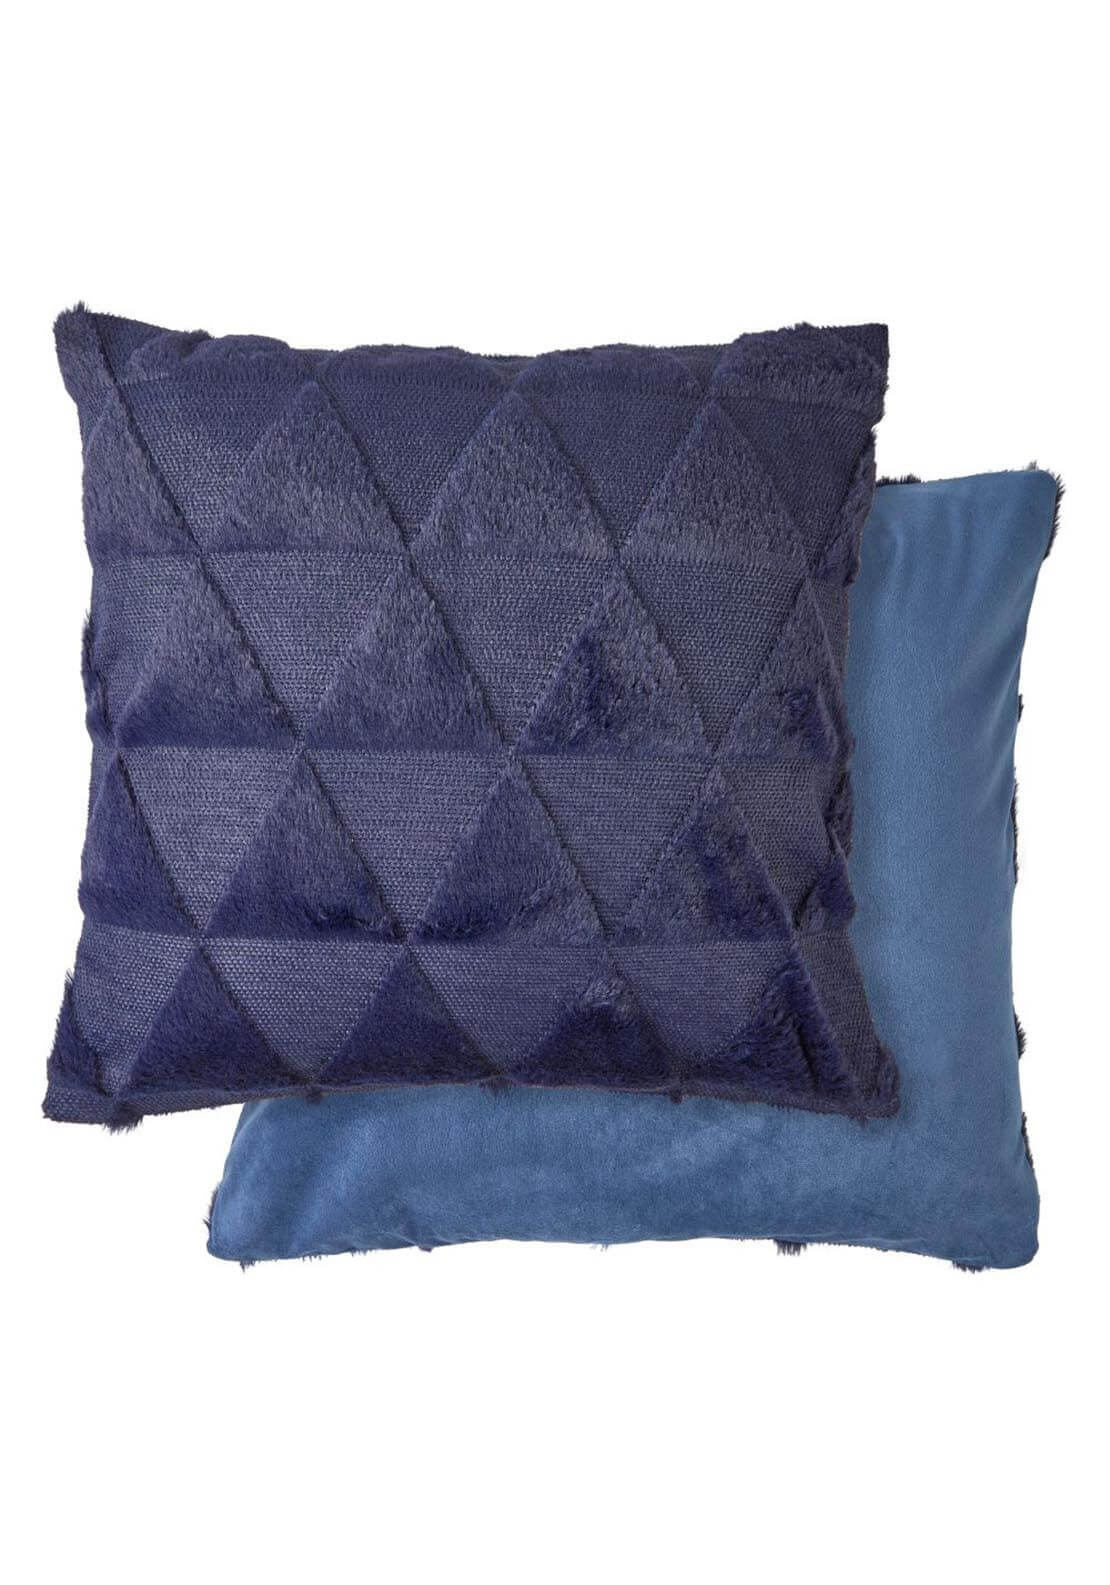 The Home Collection Nyla Cushion - Navy 2 Shaws Department Stores